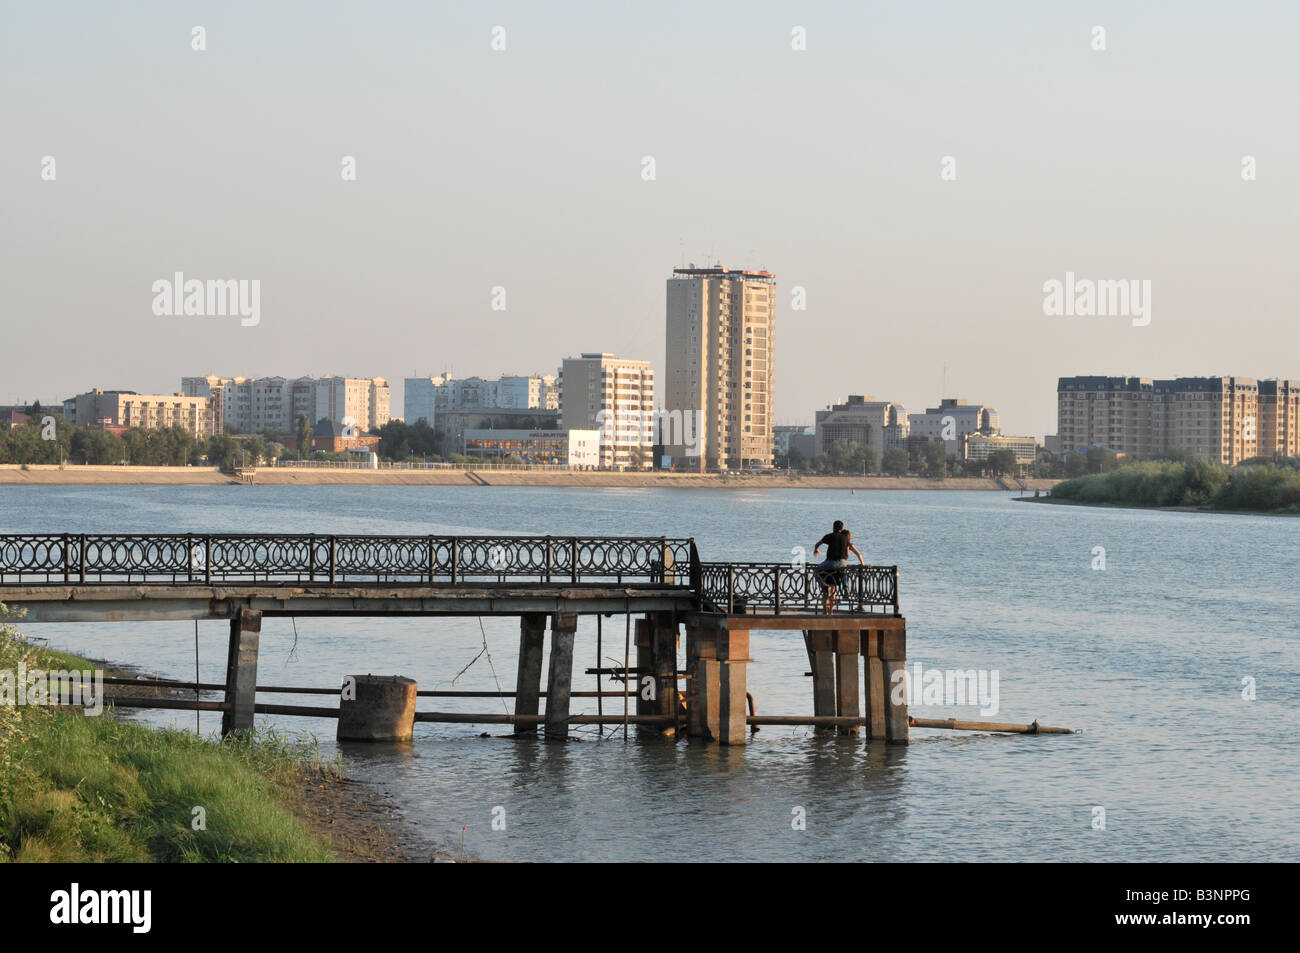 Evening view of the City of Atyrau in Western Kazakhstan from the Ural river, the historic boundary between Europe and Asia Stock Photo